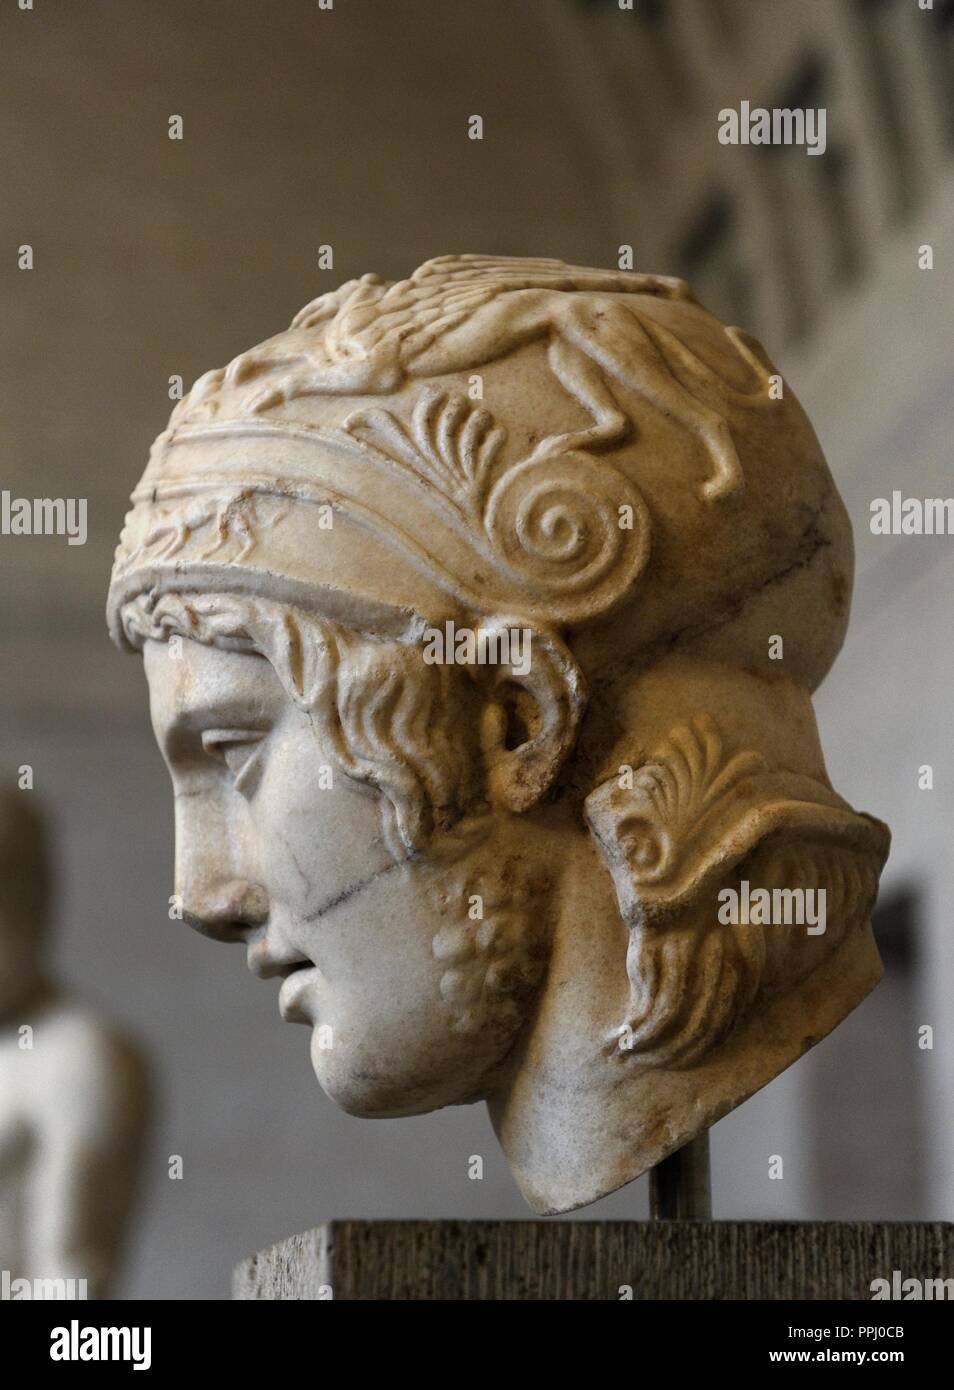 Ares, the god of war. Roman equivalent : Mars. Head of a statue of Ares. Roman sculpture after original of about 430 BC. Glytothek. Munich. Stock Photo